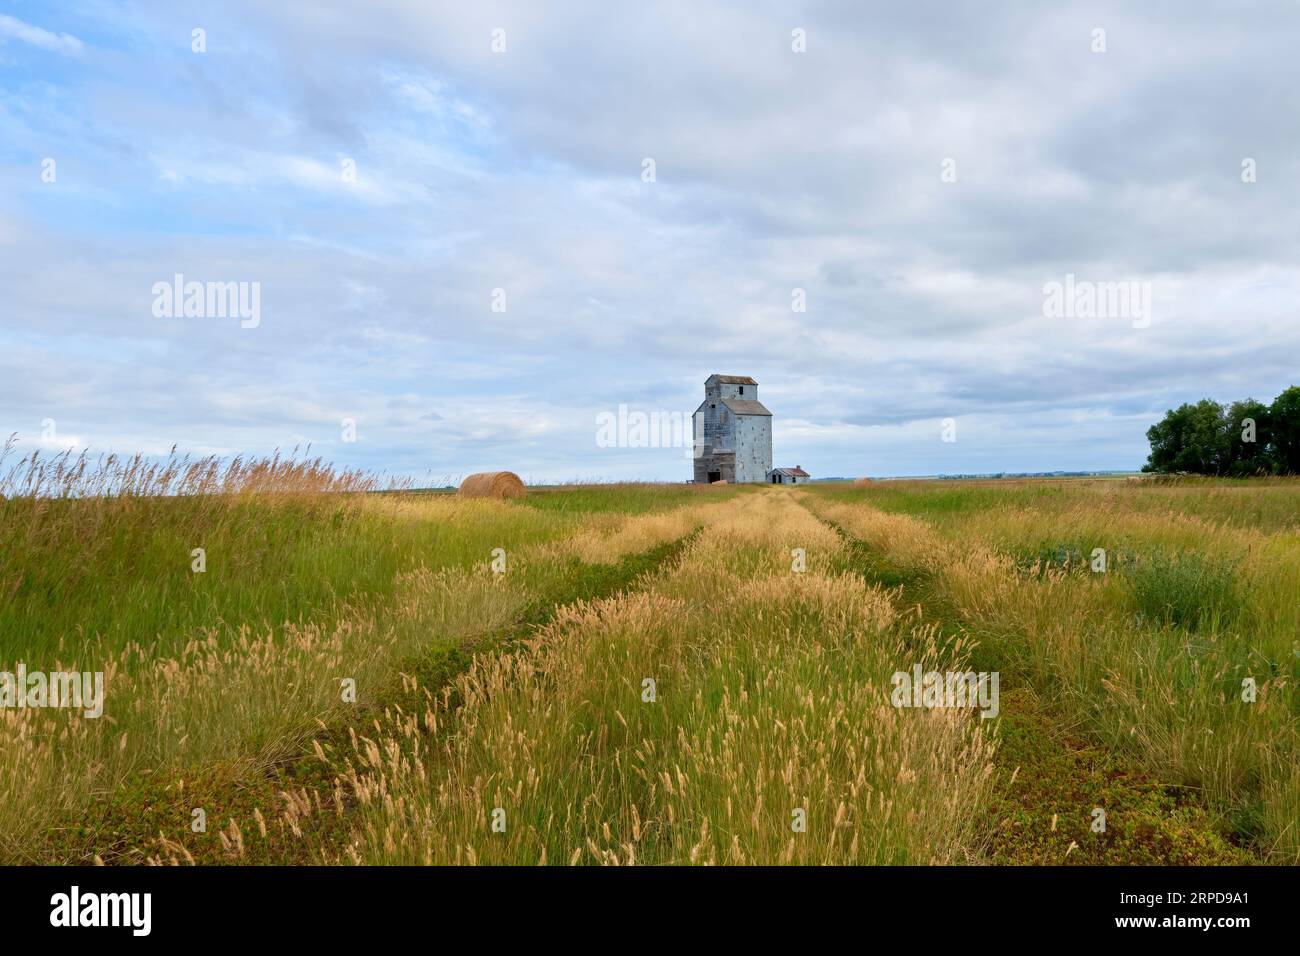 Old and weatherd grain elevator at the end of a lane in a farm field in rural Saskatchewan. Stock Photo